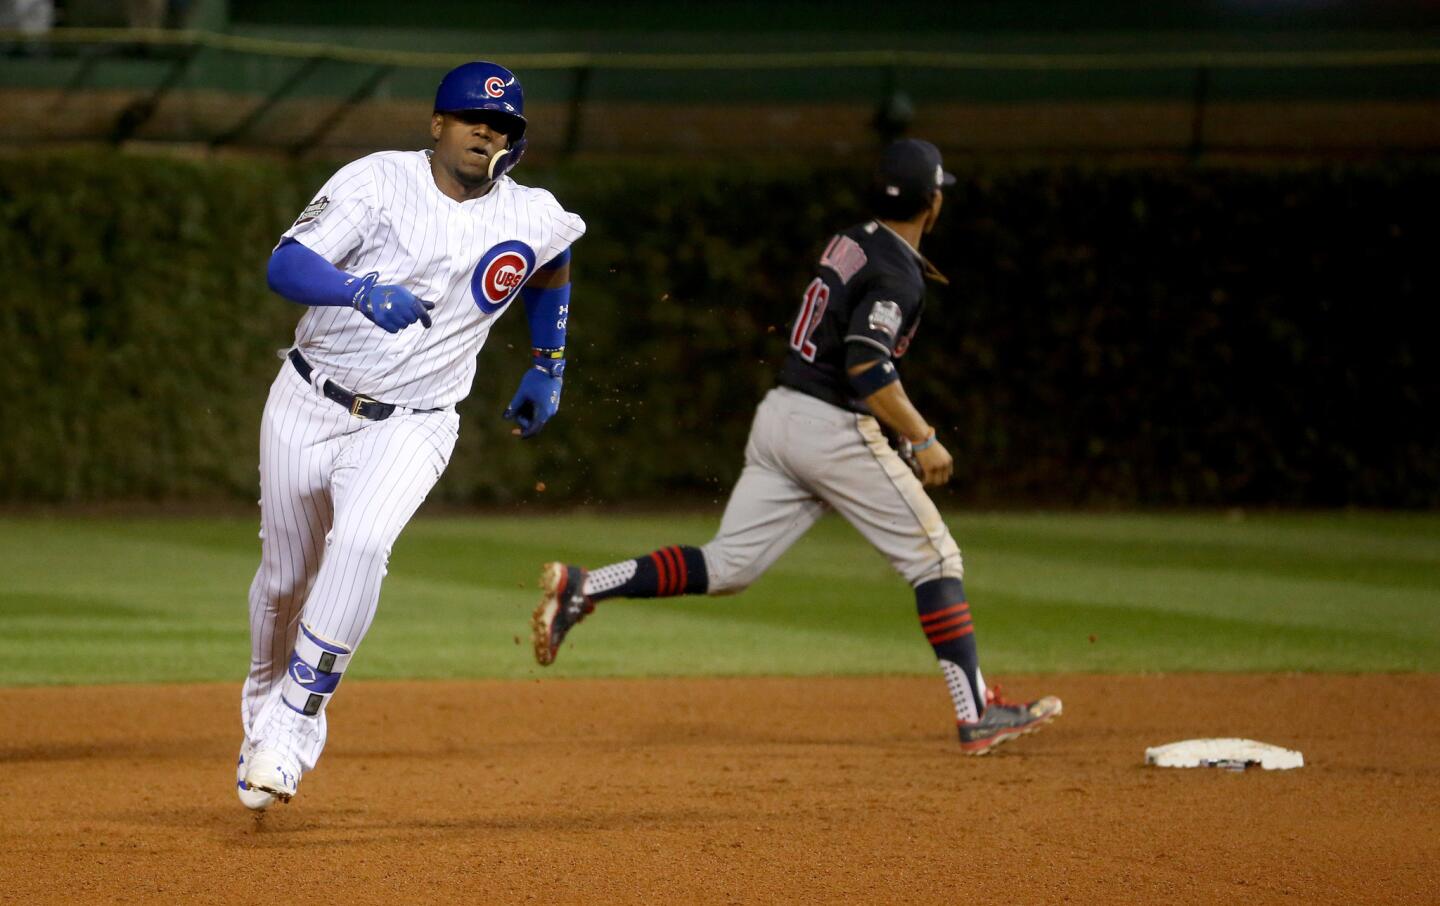 Jorge Soler runs to third base for a triple in the seventh inning Friday, Oct. 28, 2016, in Game 3 of the World Series at Wrigley Field.